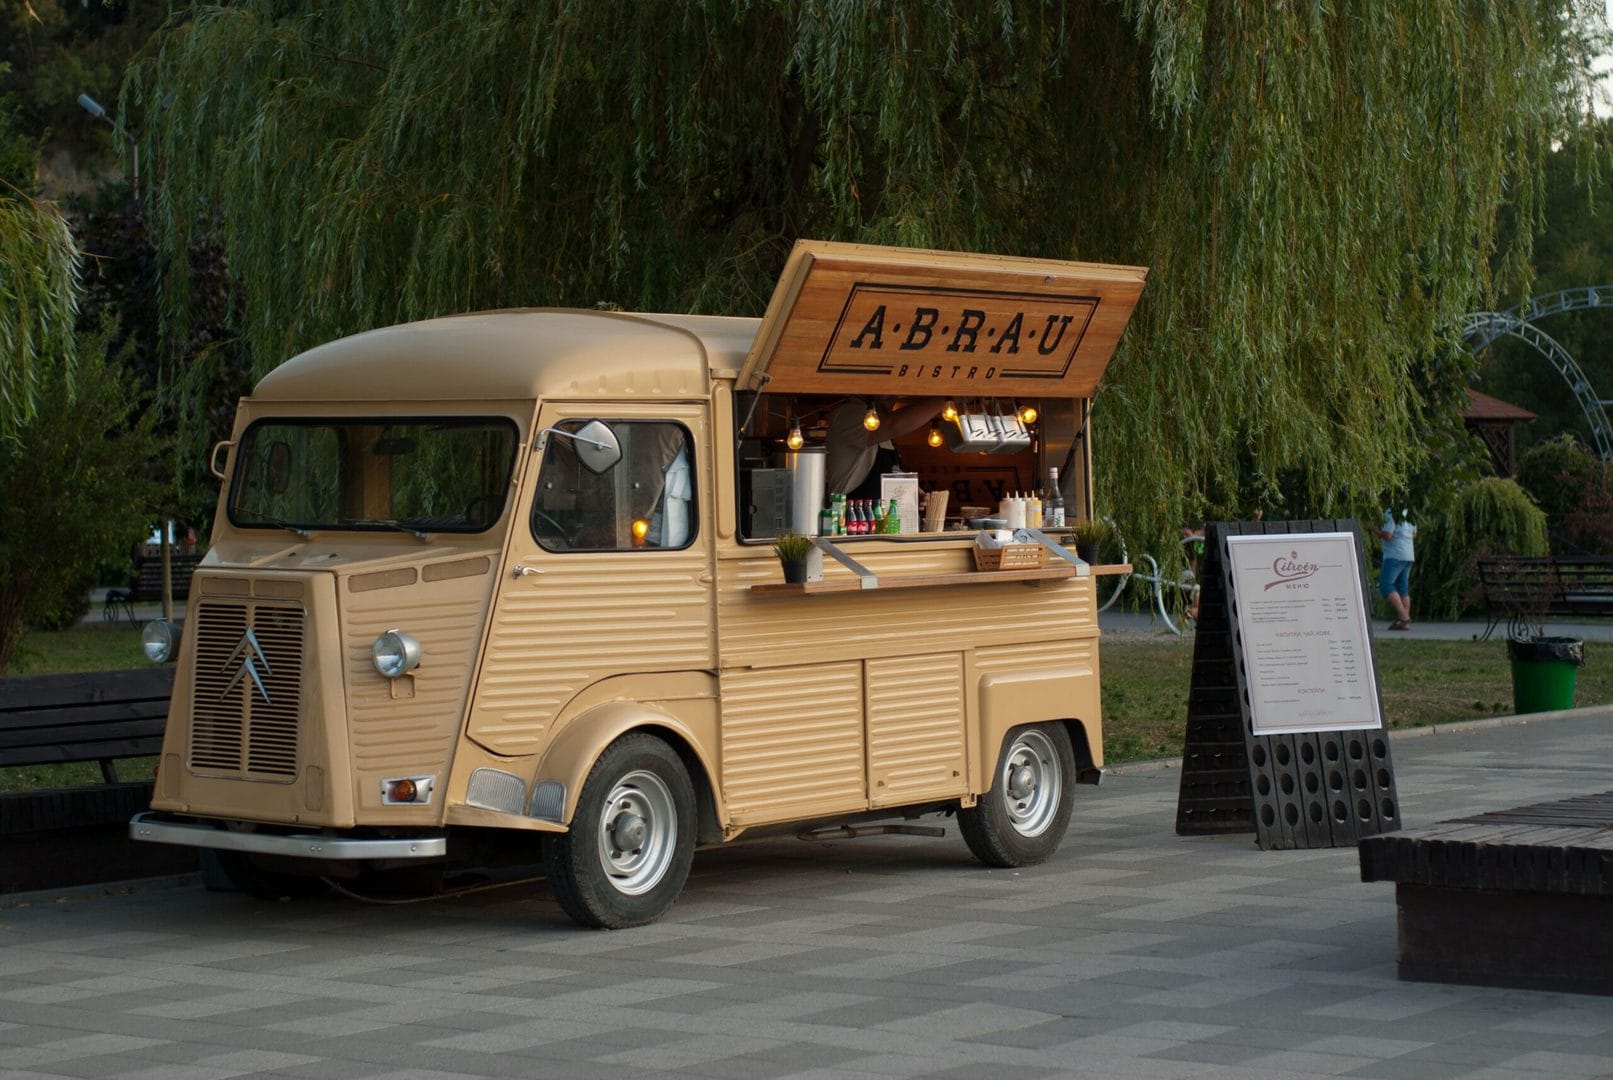 A cute vintage bus turned into a food truck great for weddings.